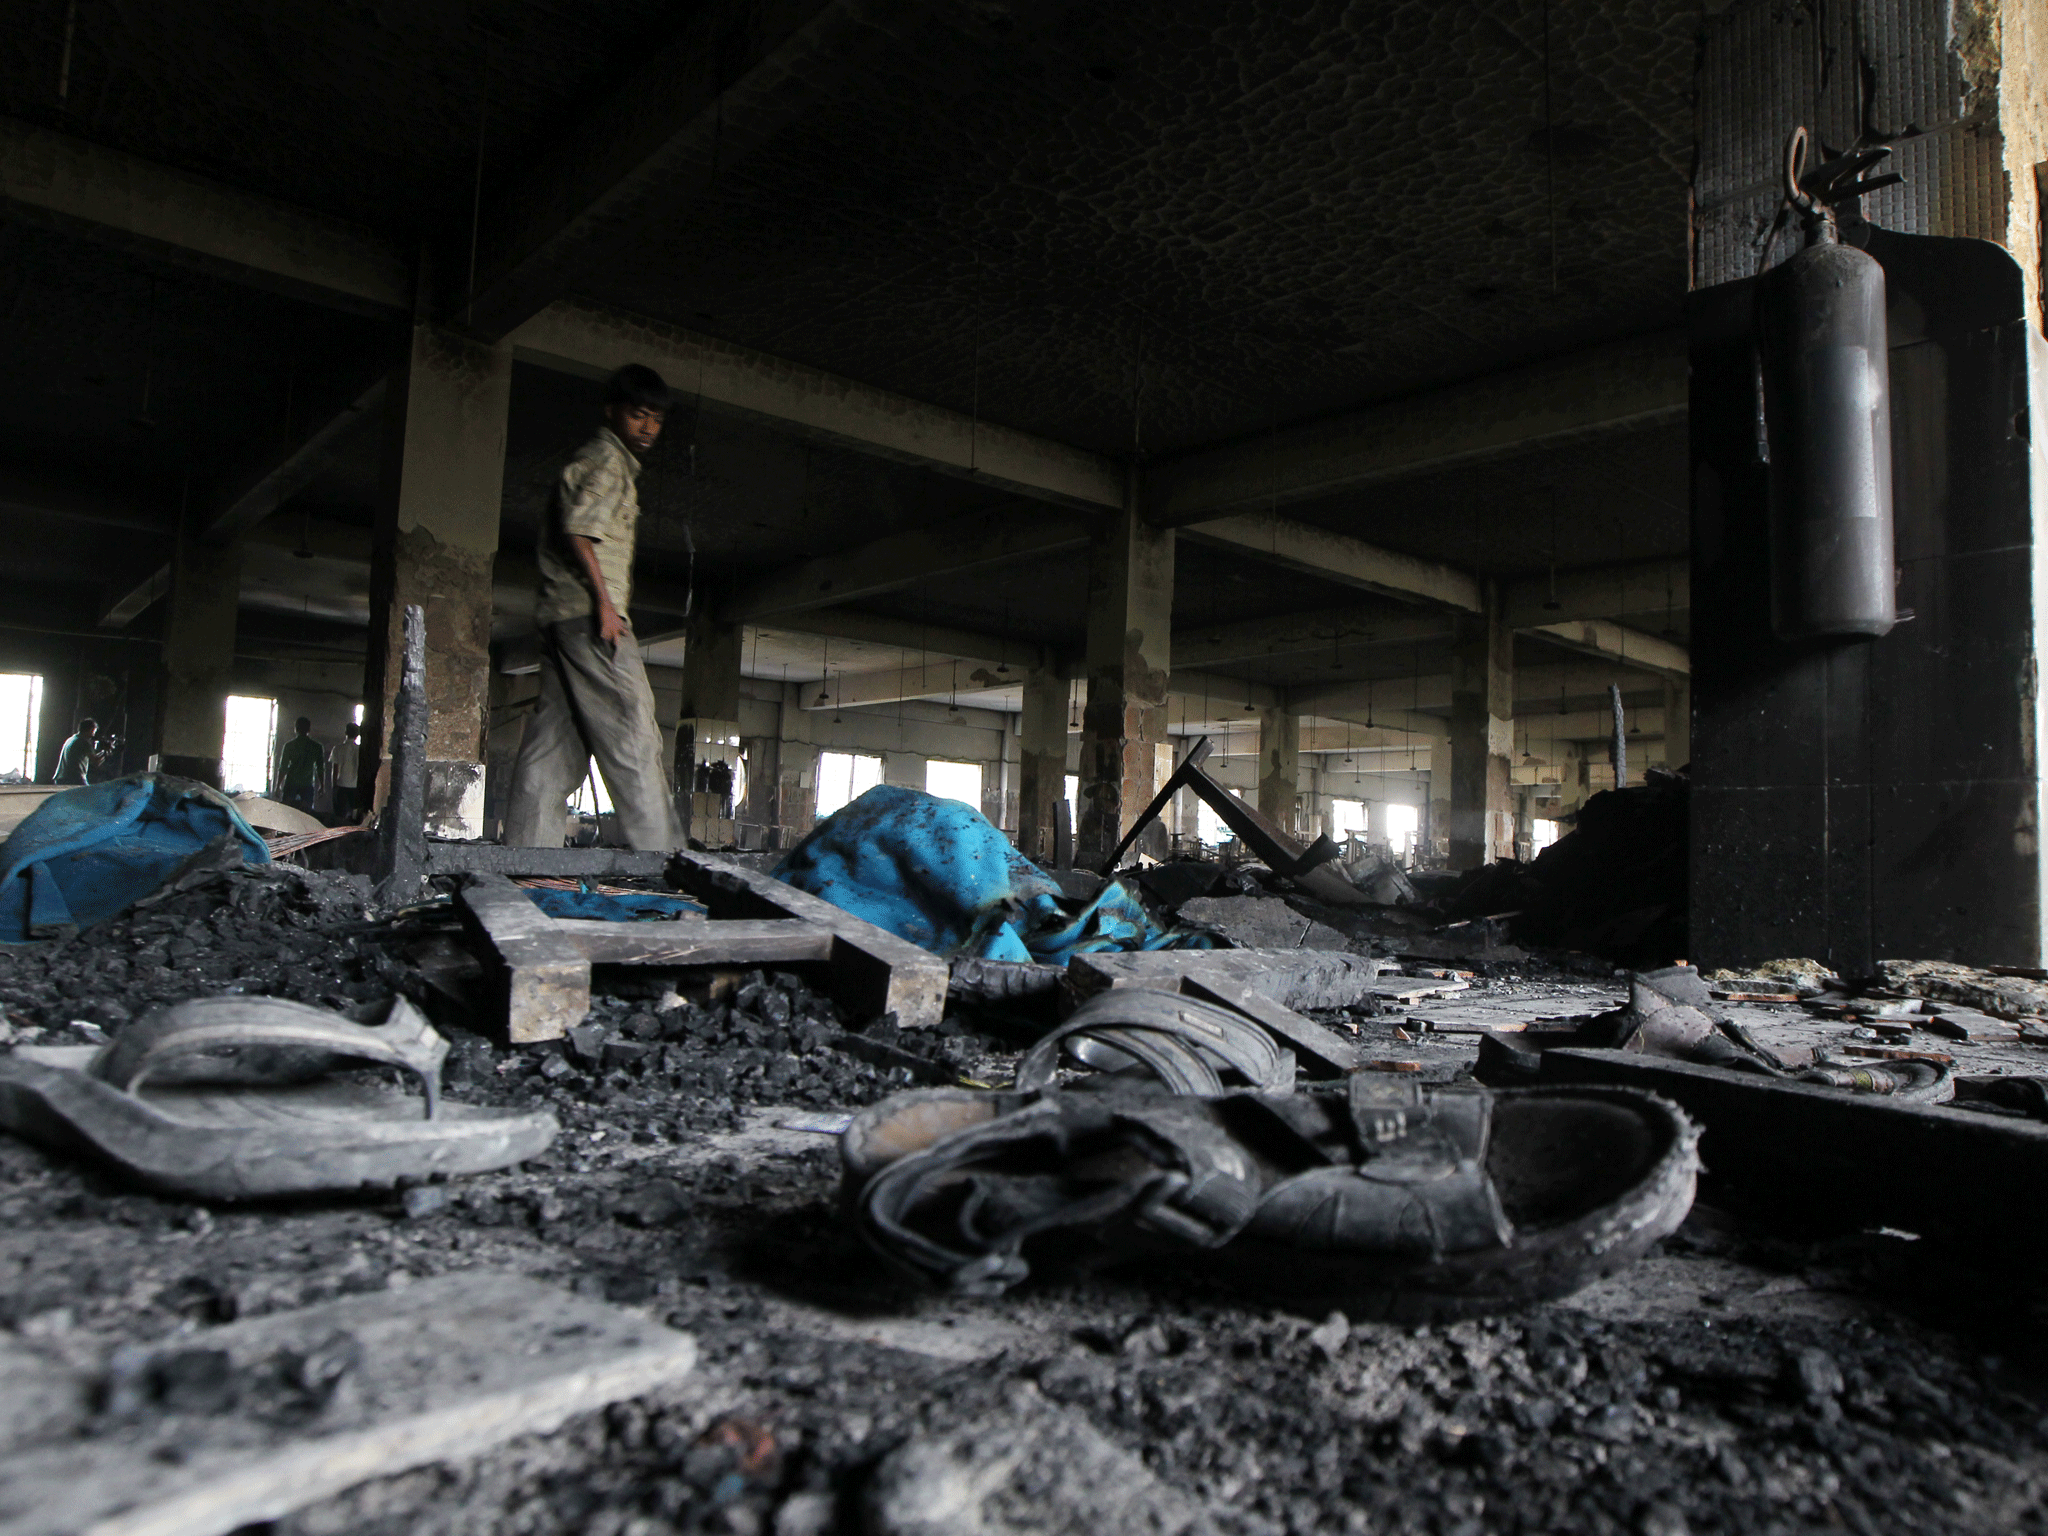 The charred remains of the Tazreen Fashion factory after a fire last November that killed 110 workers. It is claimed that factory managers had prevented employees from escaping the blaze.